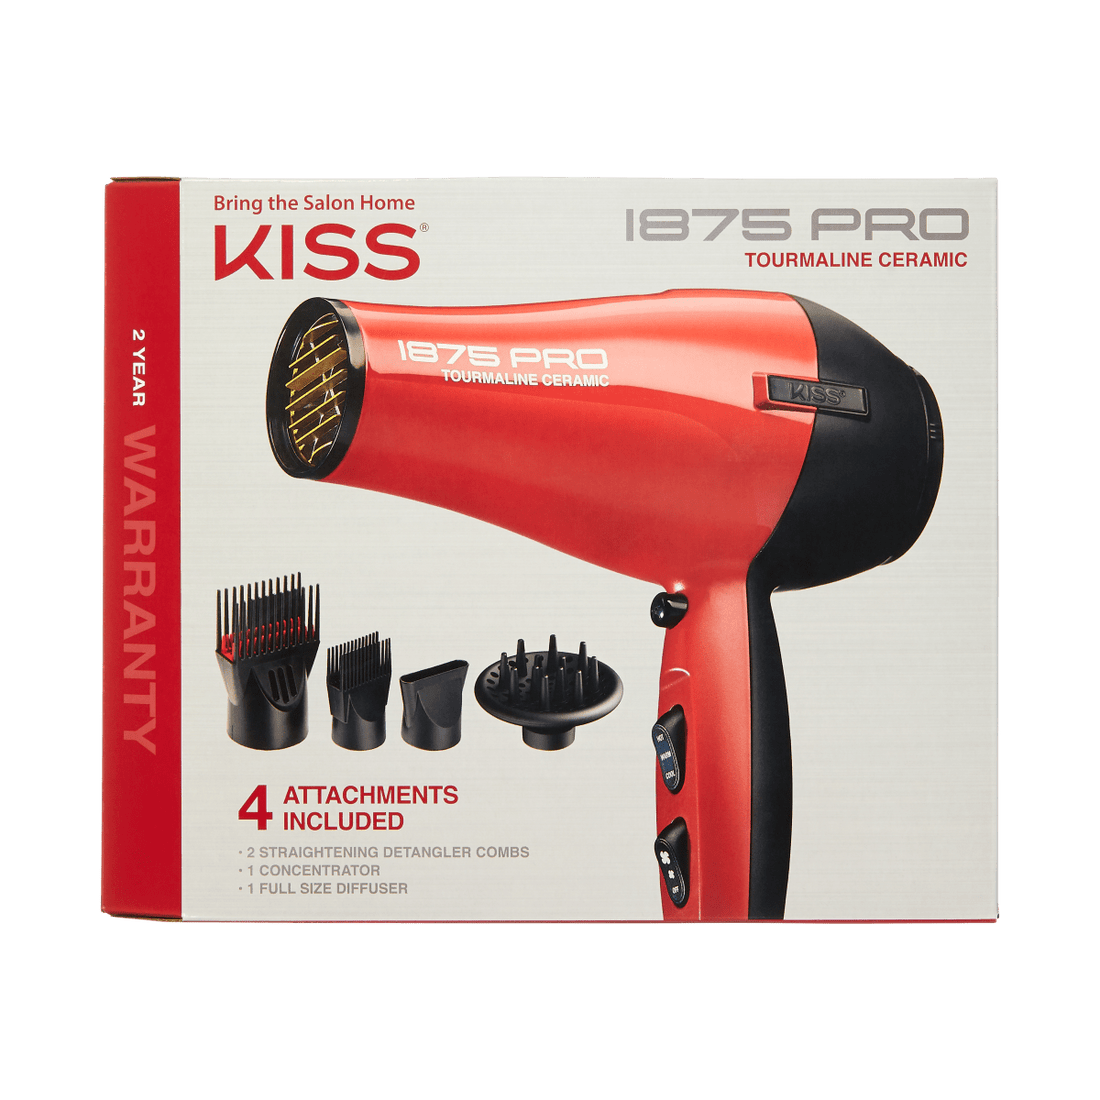 KISS 1875 Pro Ceramic Tourmaline Hair Dryer with 4 Attachments